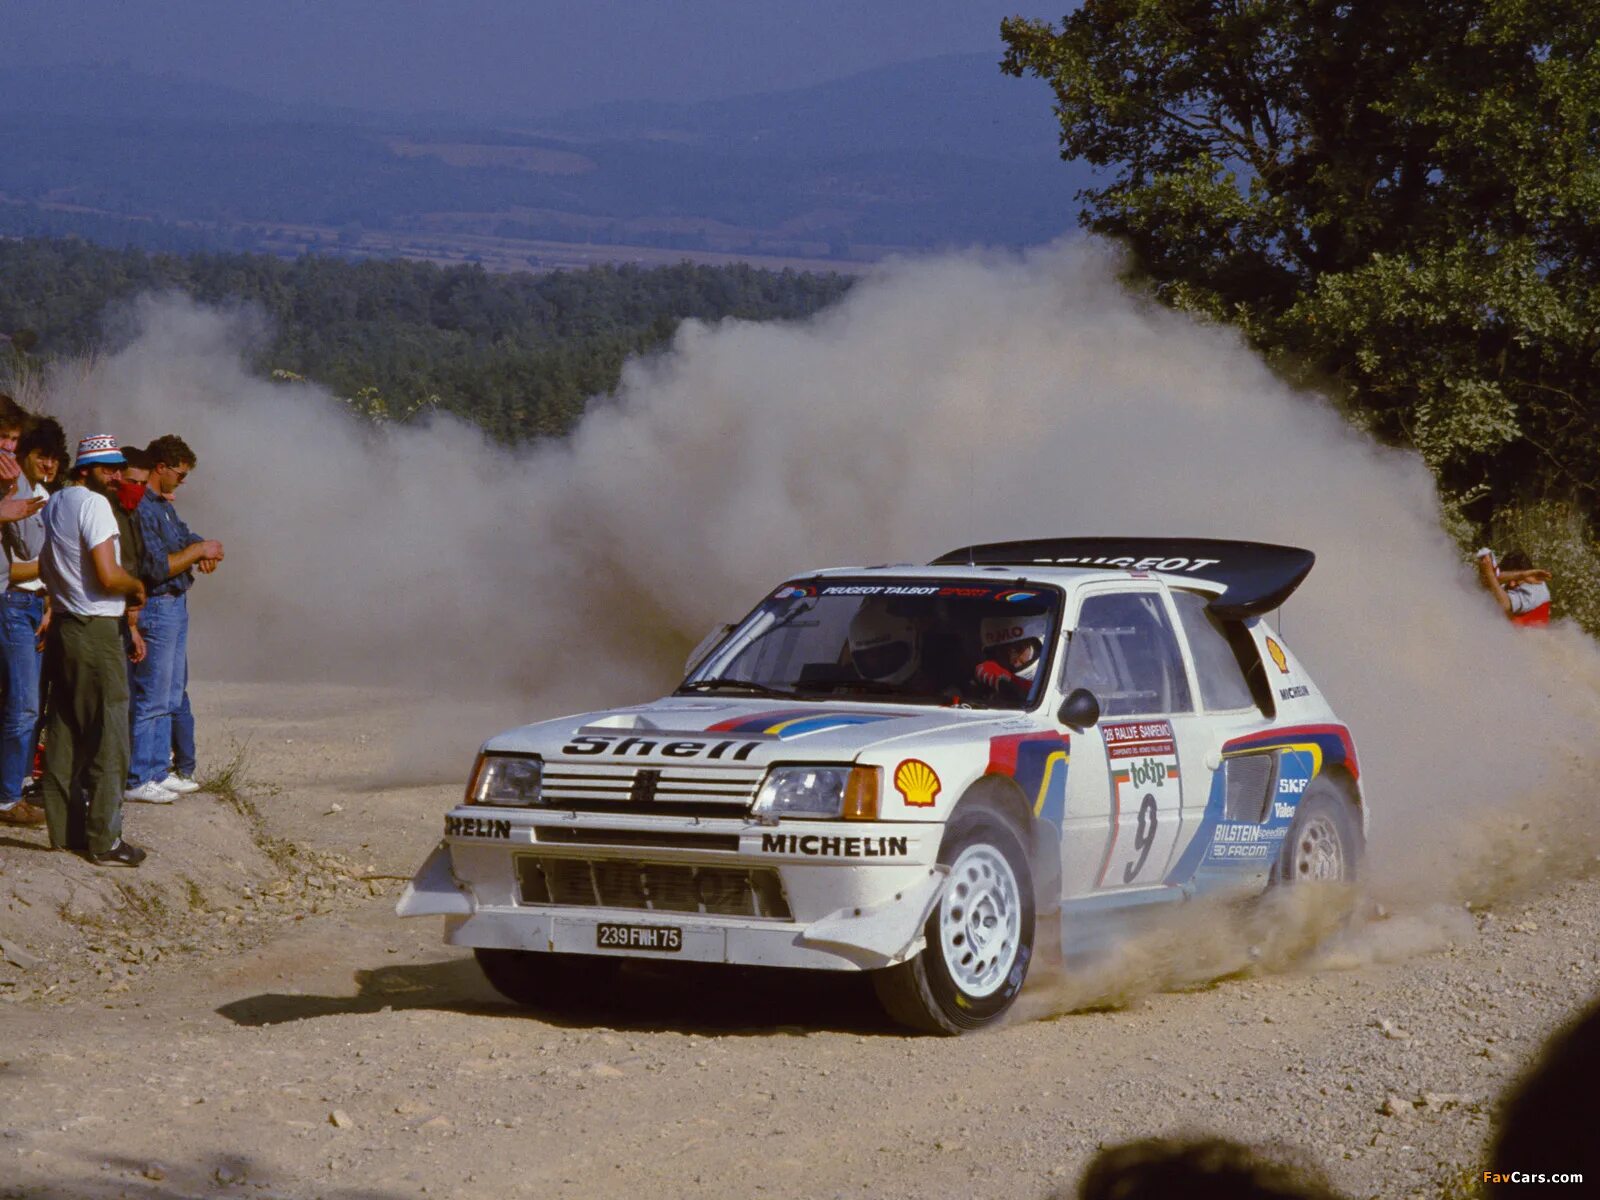 Ралли б. Peugeot 205 t16 Rally. Peugeot 205 Rally Group b. Peugeot 205 t16 EVO 2. Peugeot 205 t16 Group b.